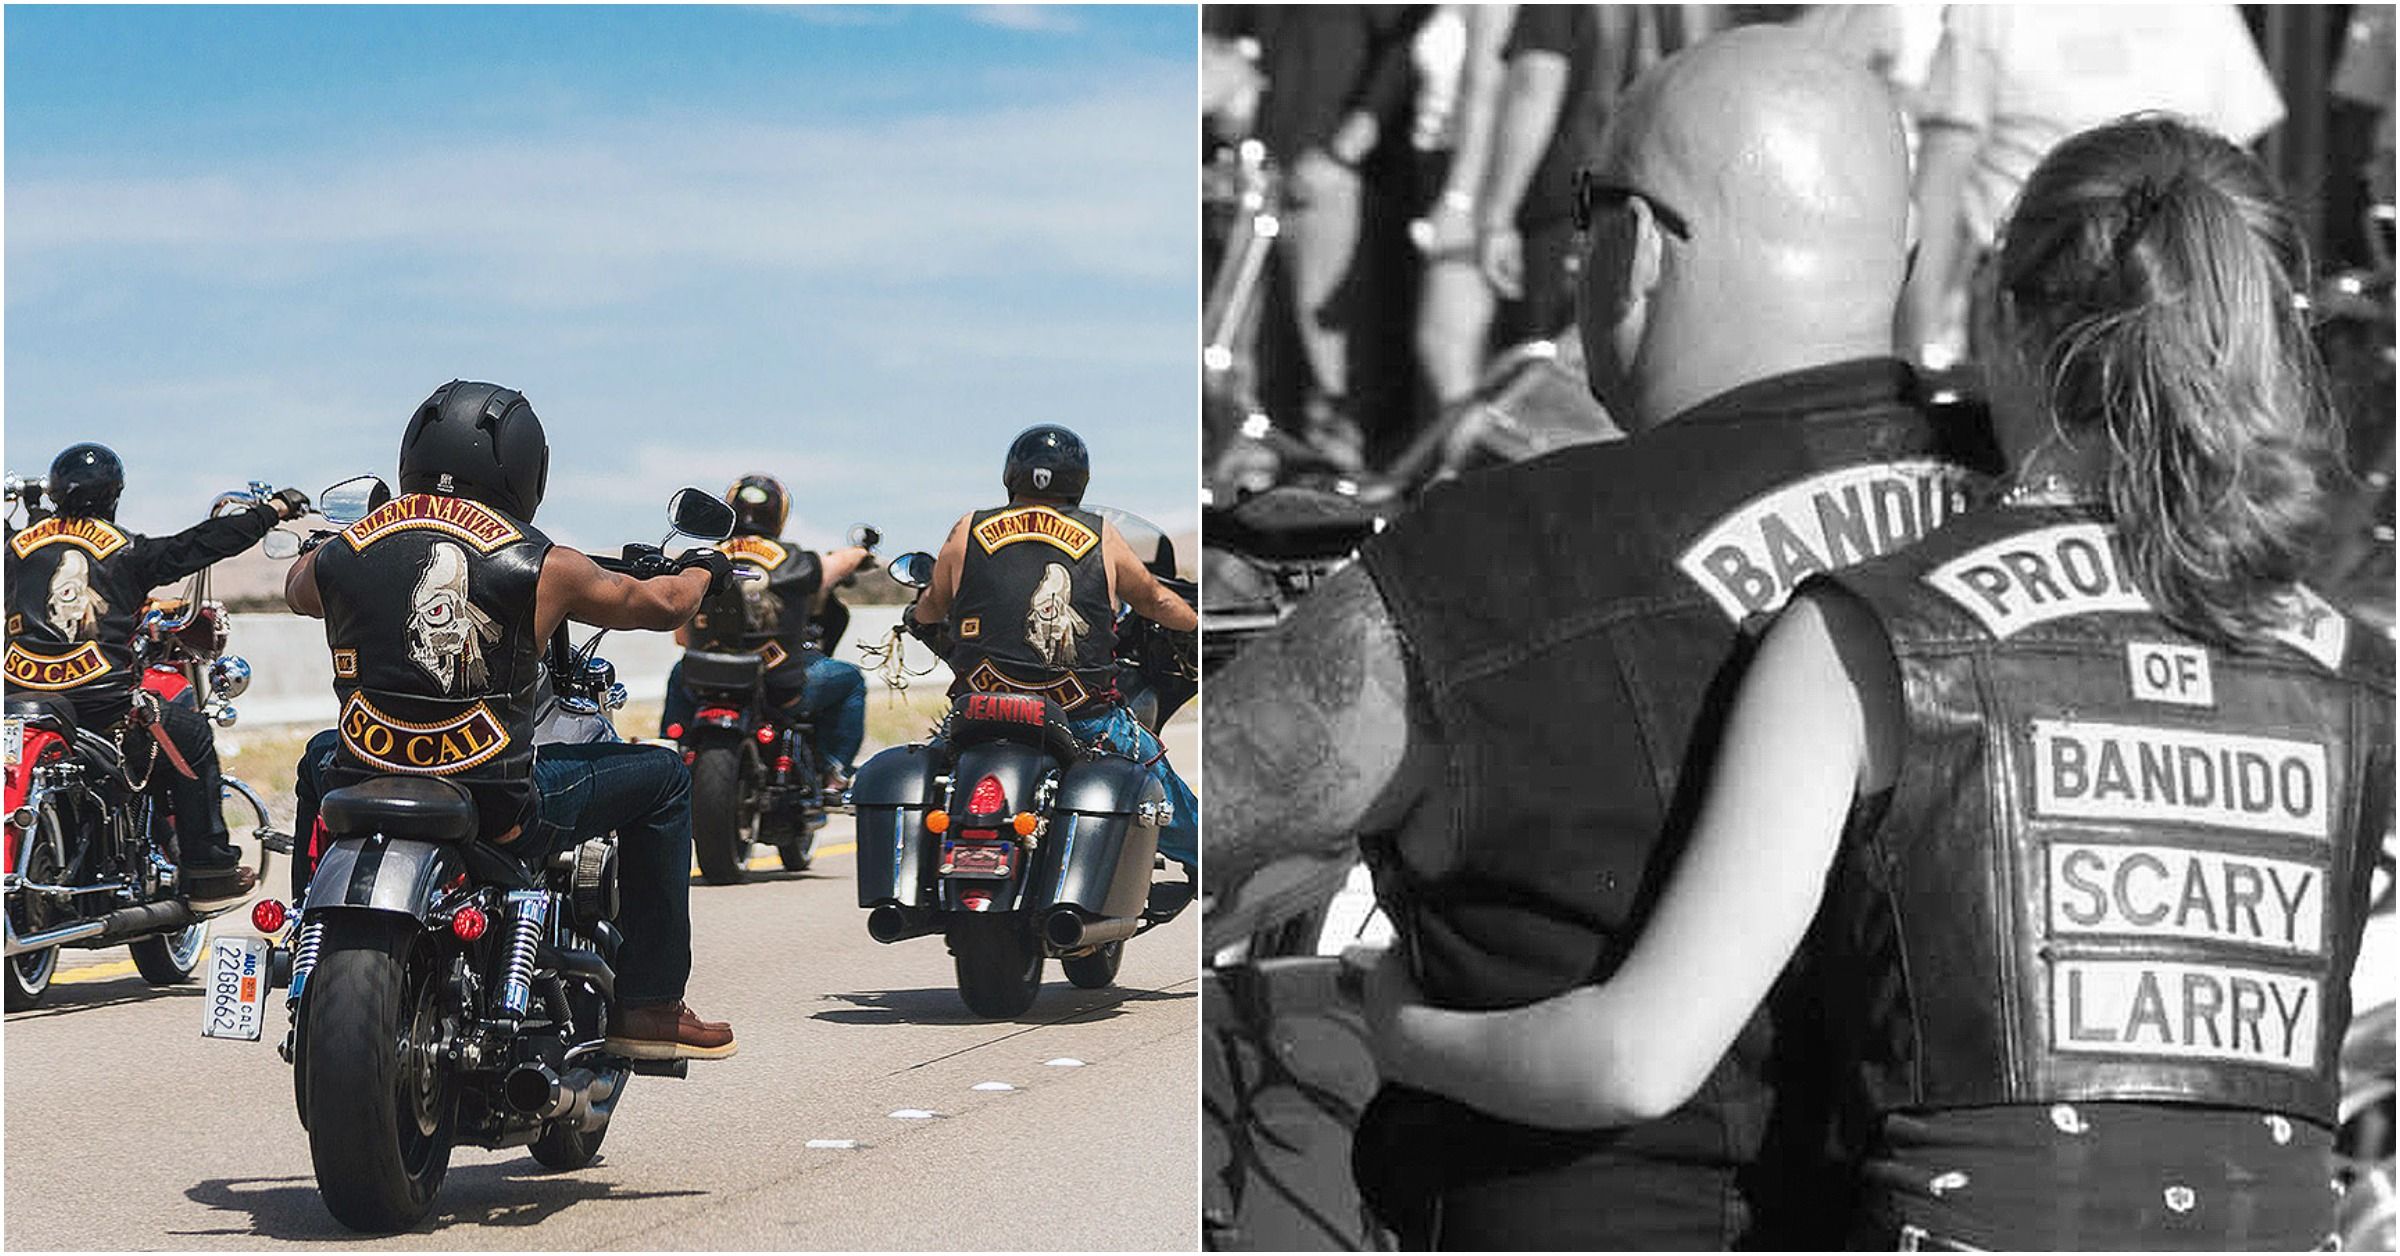 Svække Missionær Eventyrer 15 Things You Didn't Know About The One-Percenter Motorcycle Clubs